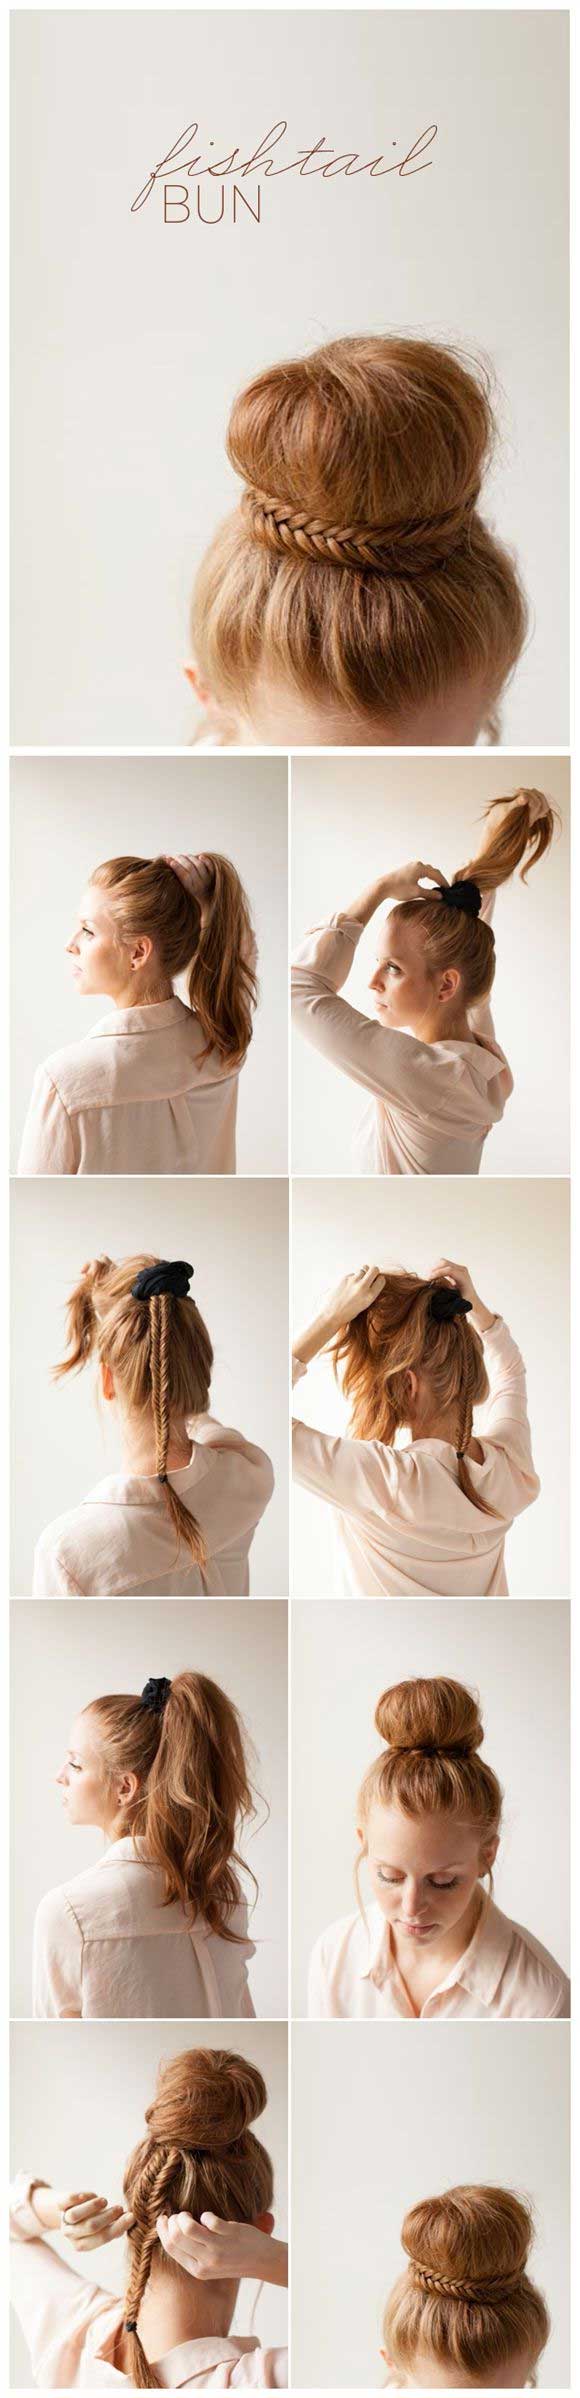 Best and Glamorous Bun Hairstyle Ideas